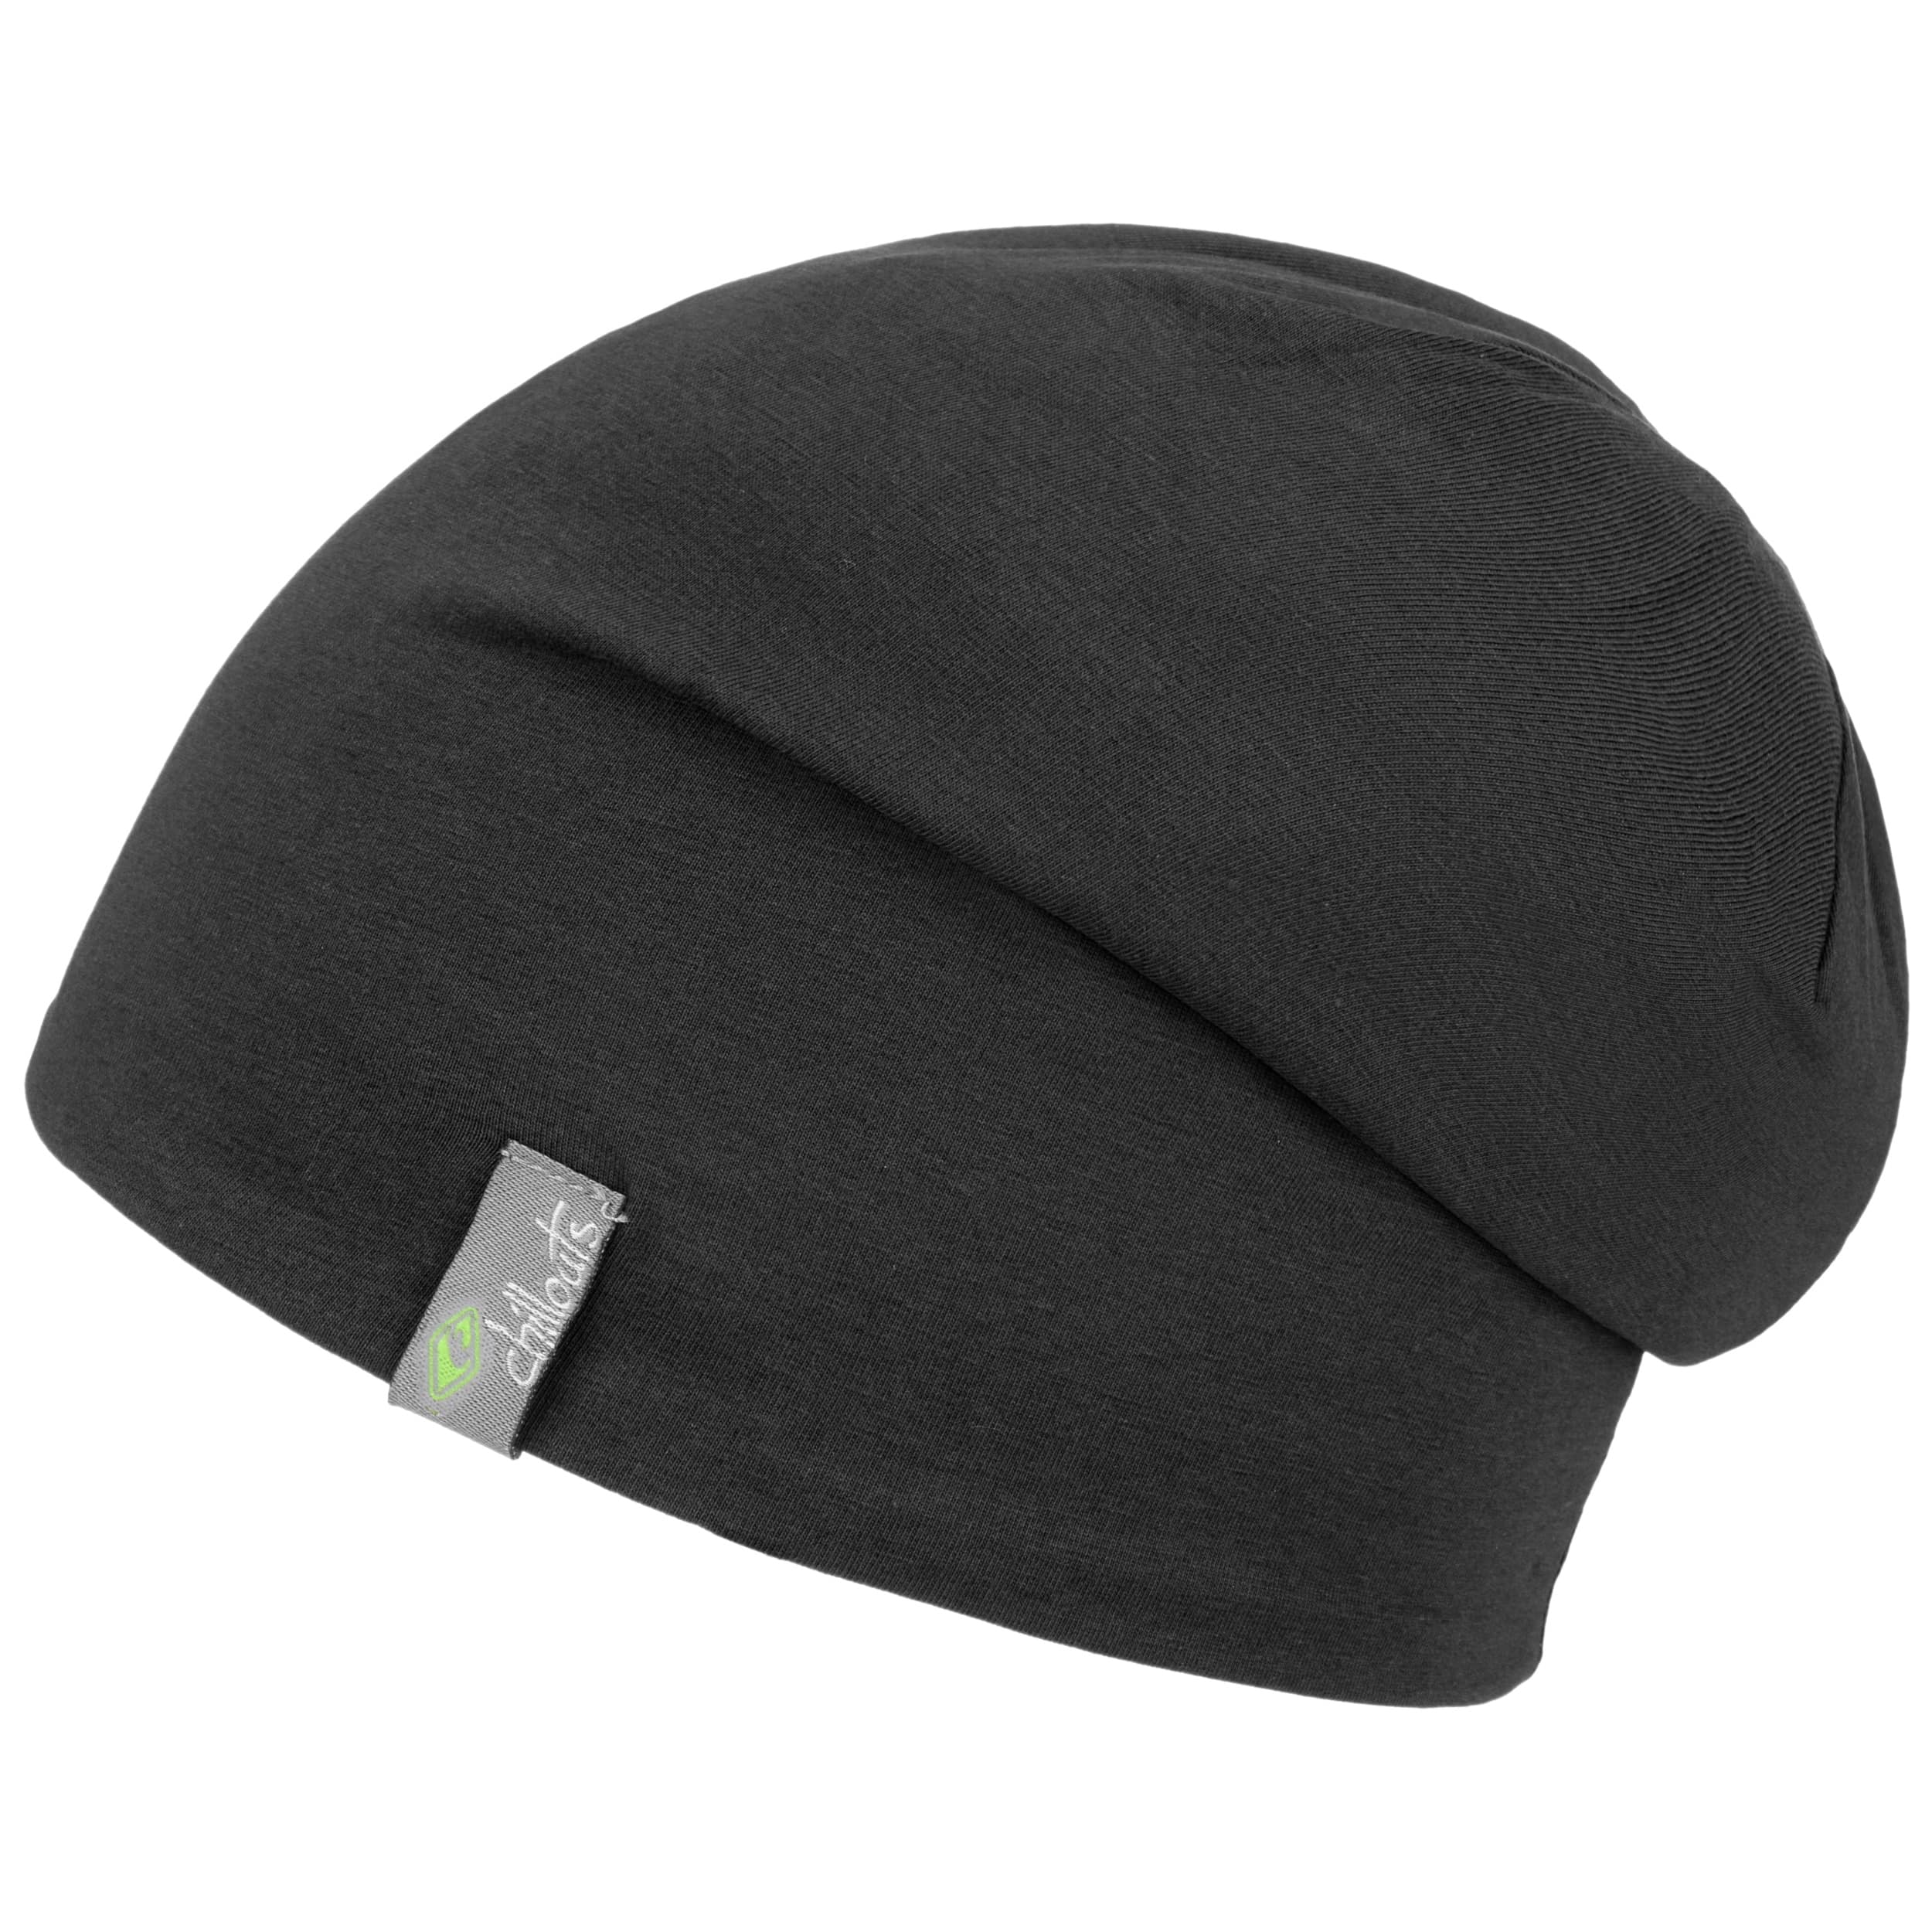 Acapulco Oversize Beanie by Chillouts 26,95 € 